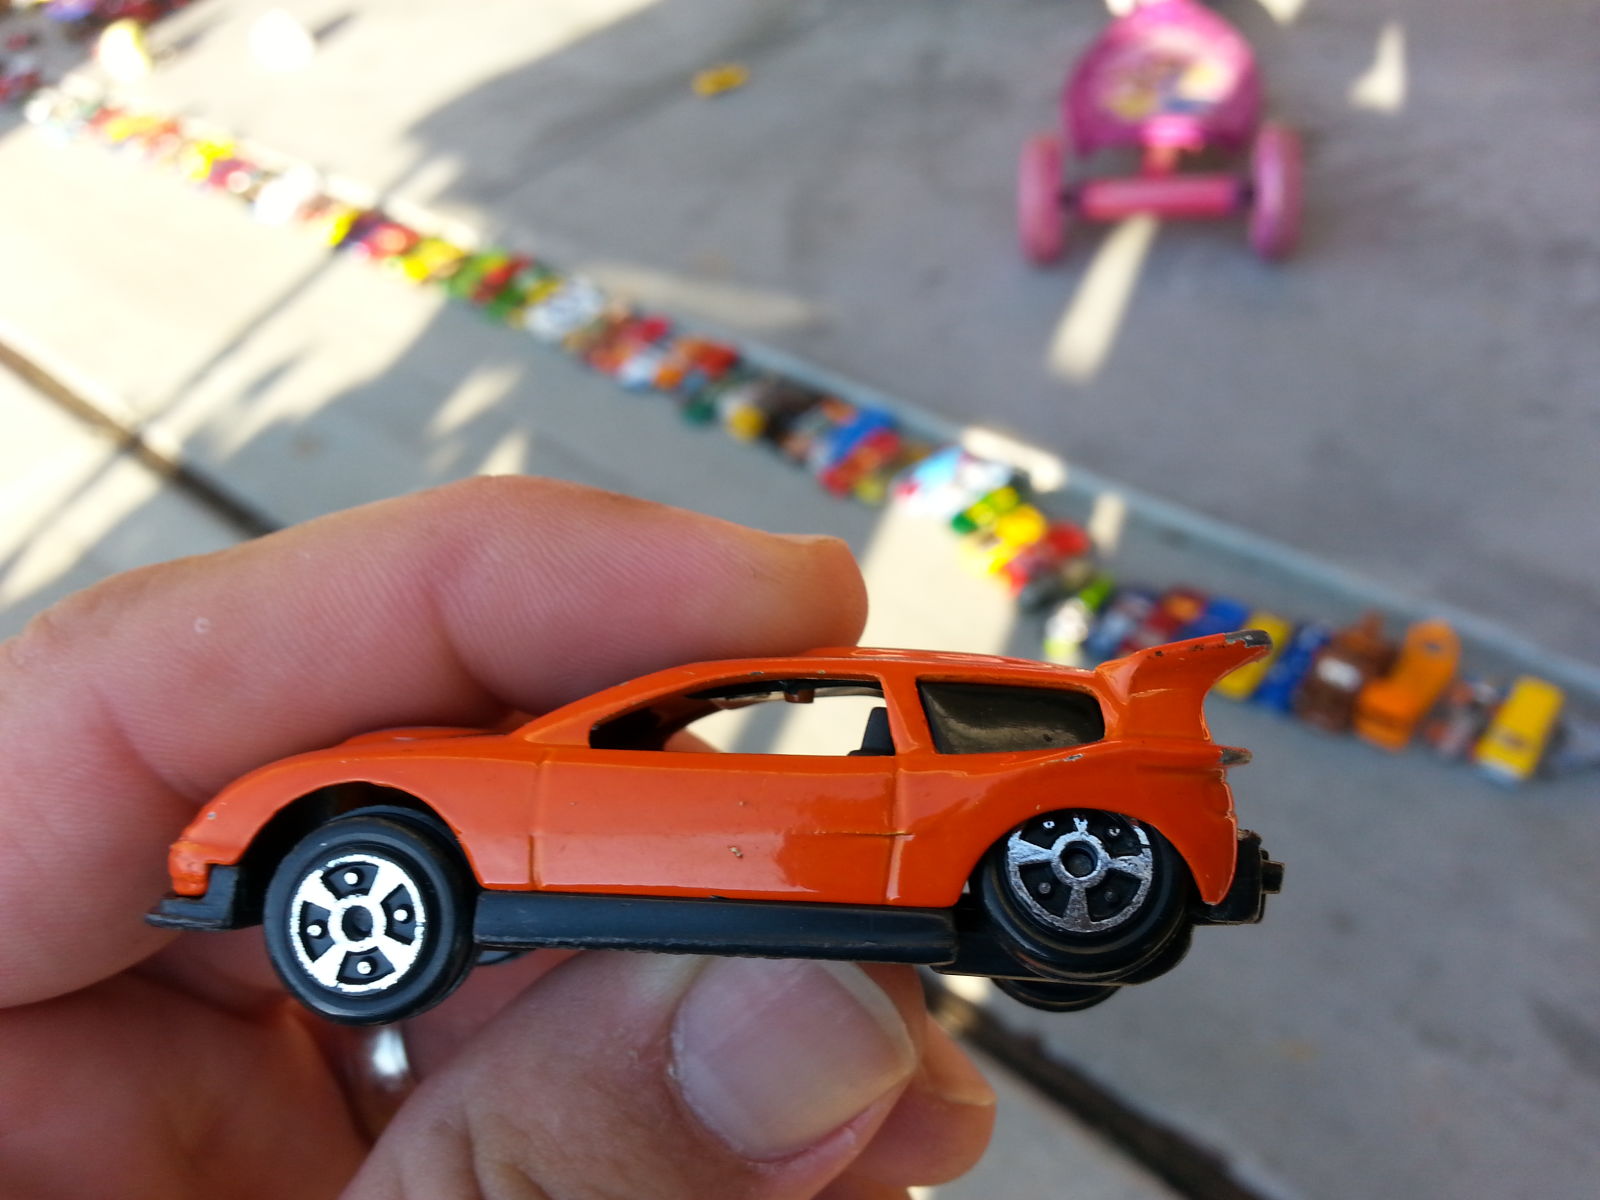 Illustration for article titled Accidentally steps on sons Hotwheels and ruined it.